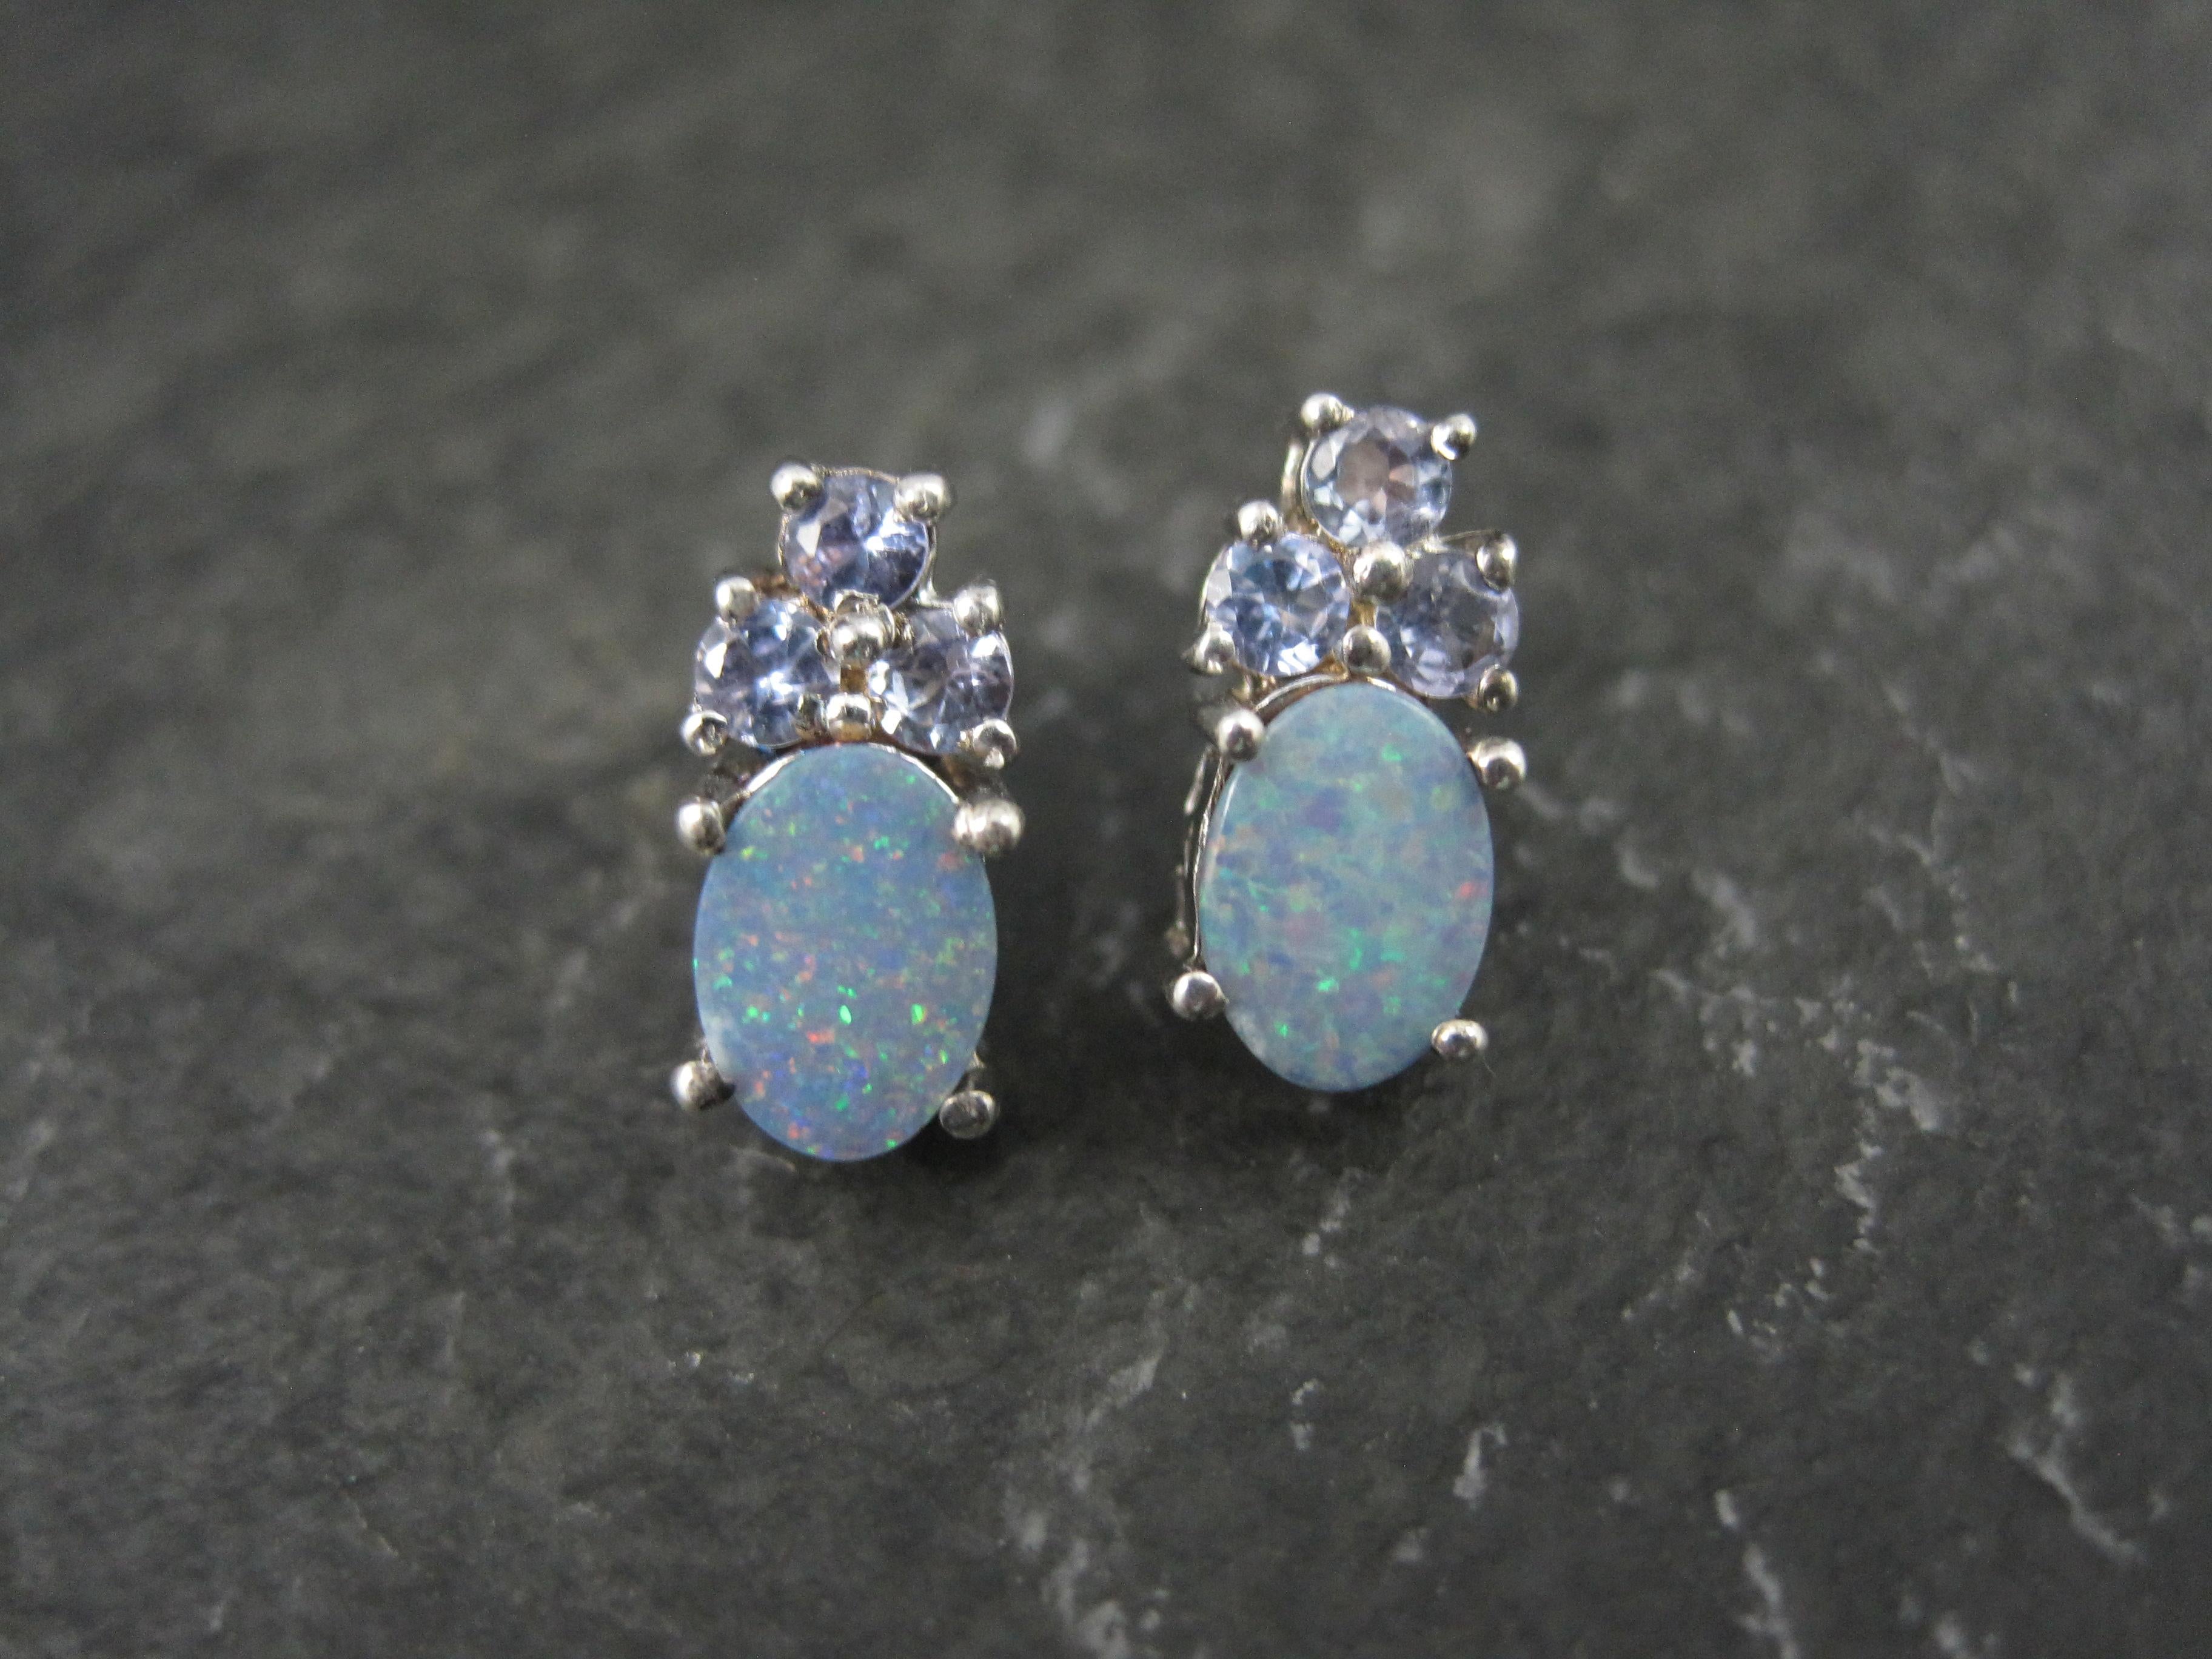 These gorgeous stud earrings are sterling silver with 5x7mm oval opal doublets and a combination of 6 round cut, 3mm tanzanites.
Measurements: 1/4 by 1/2 of an inch
Marks: 925, Chuck Clemency's STS hallmark
Condition: New old stock